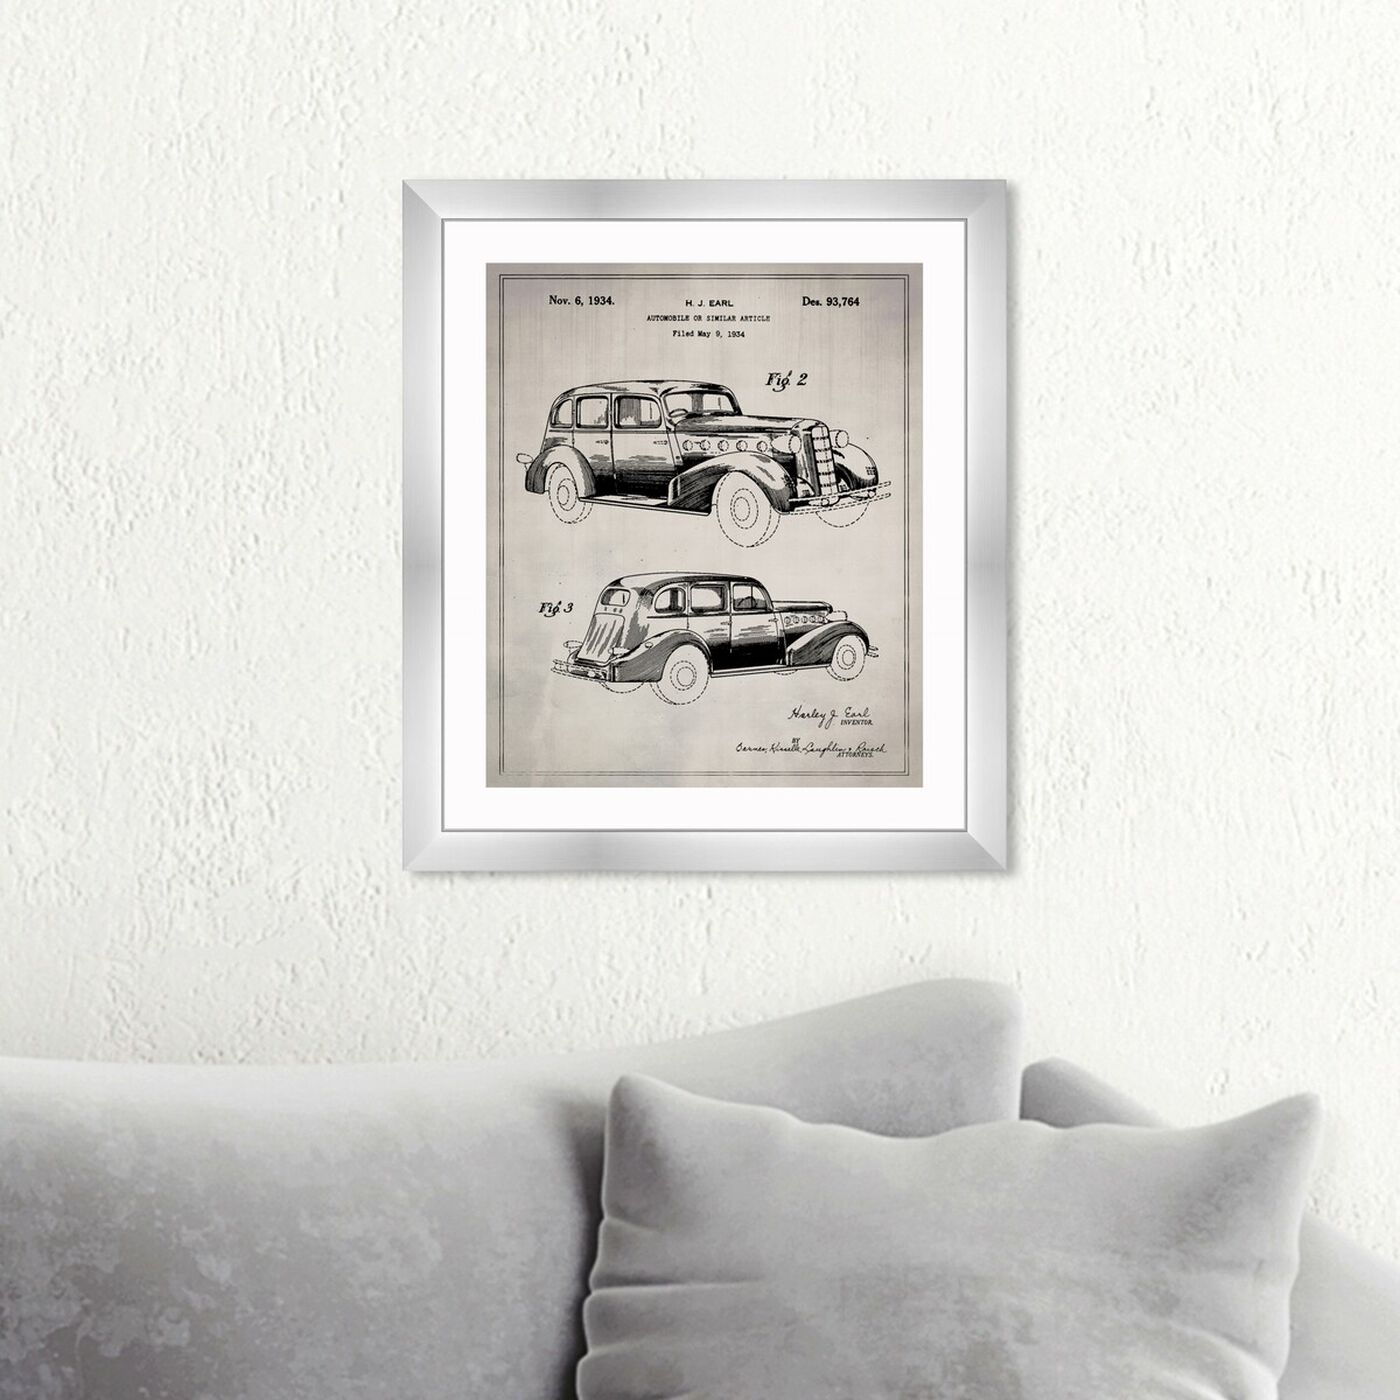 Hanging view of Automobile I 1934 featuring transportation and automobiles art.